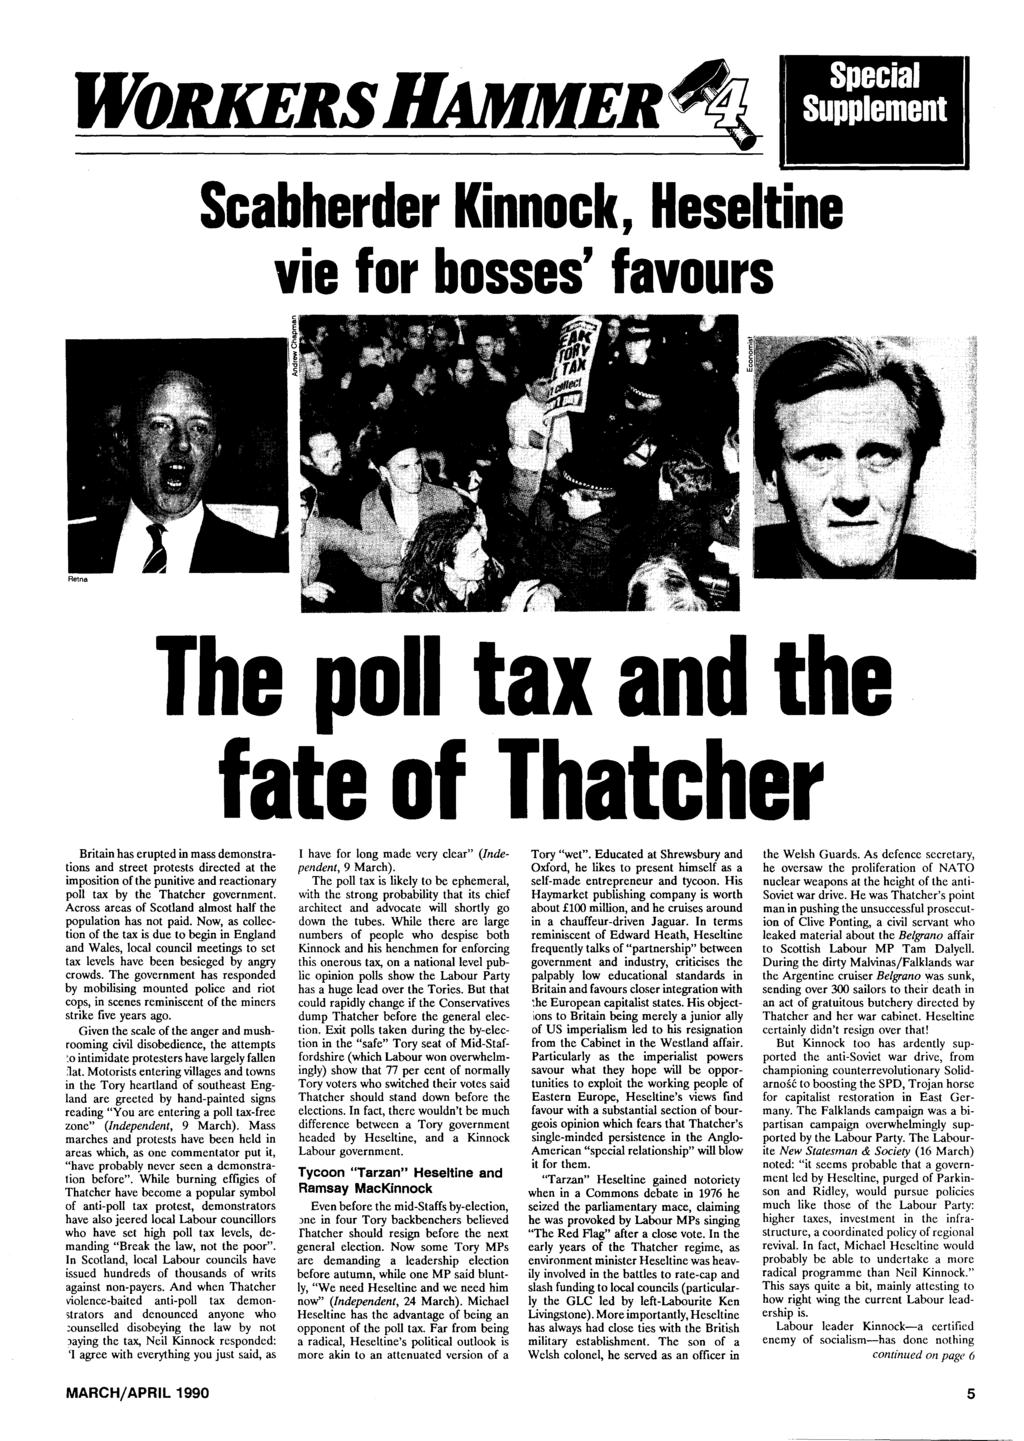 WORKERS Scabherder Kinnock, Heseltine vie for bosses' favours The poll tax and the fate of Thatcher Britain has erupted in mass demonstrations and street protests directed at the imposition ofthe